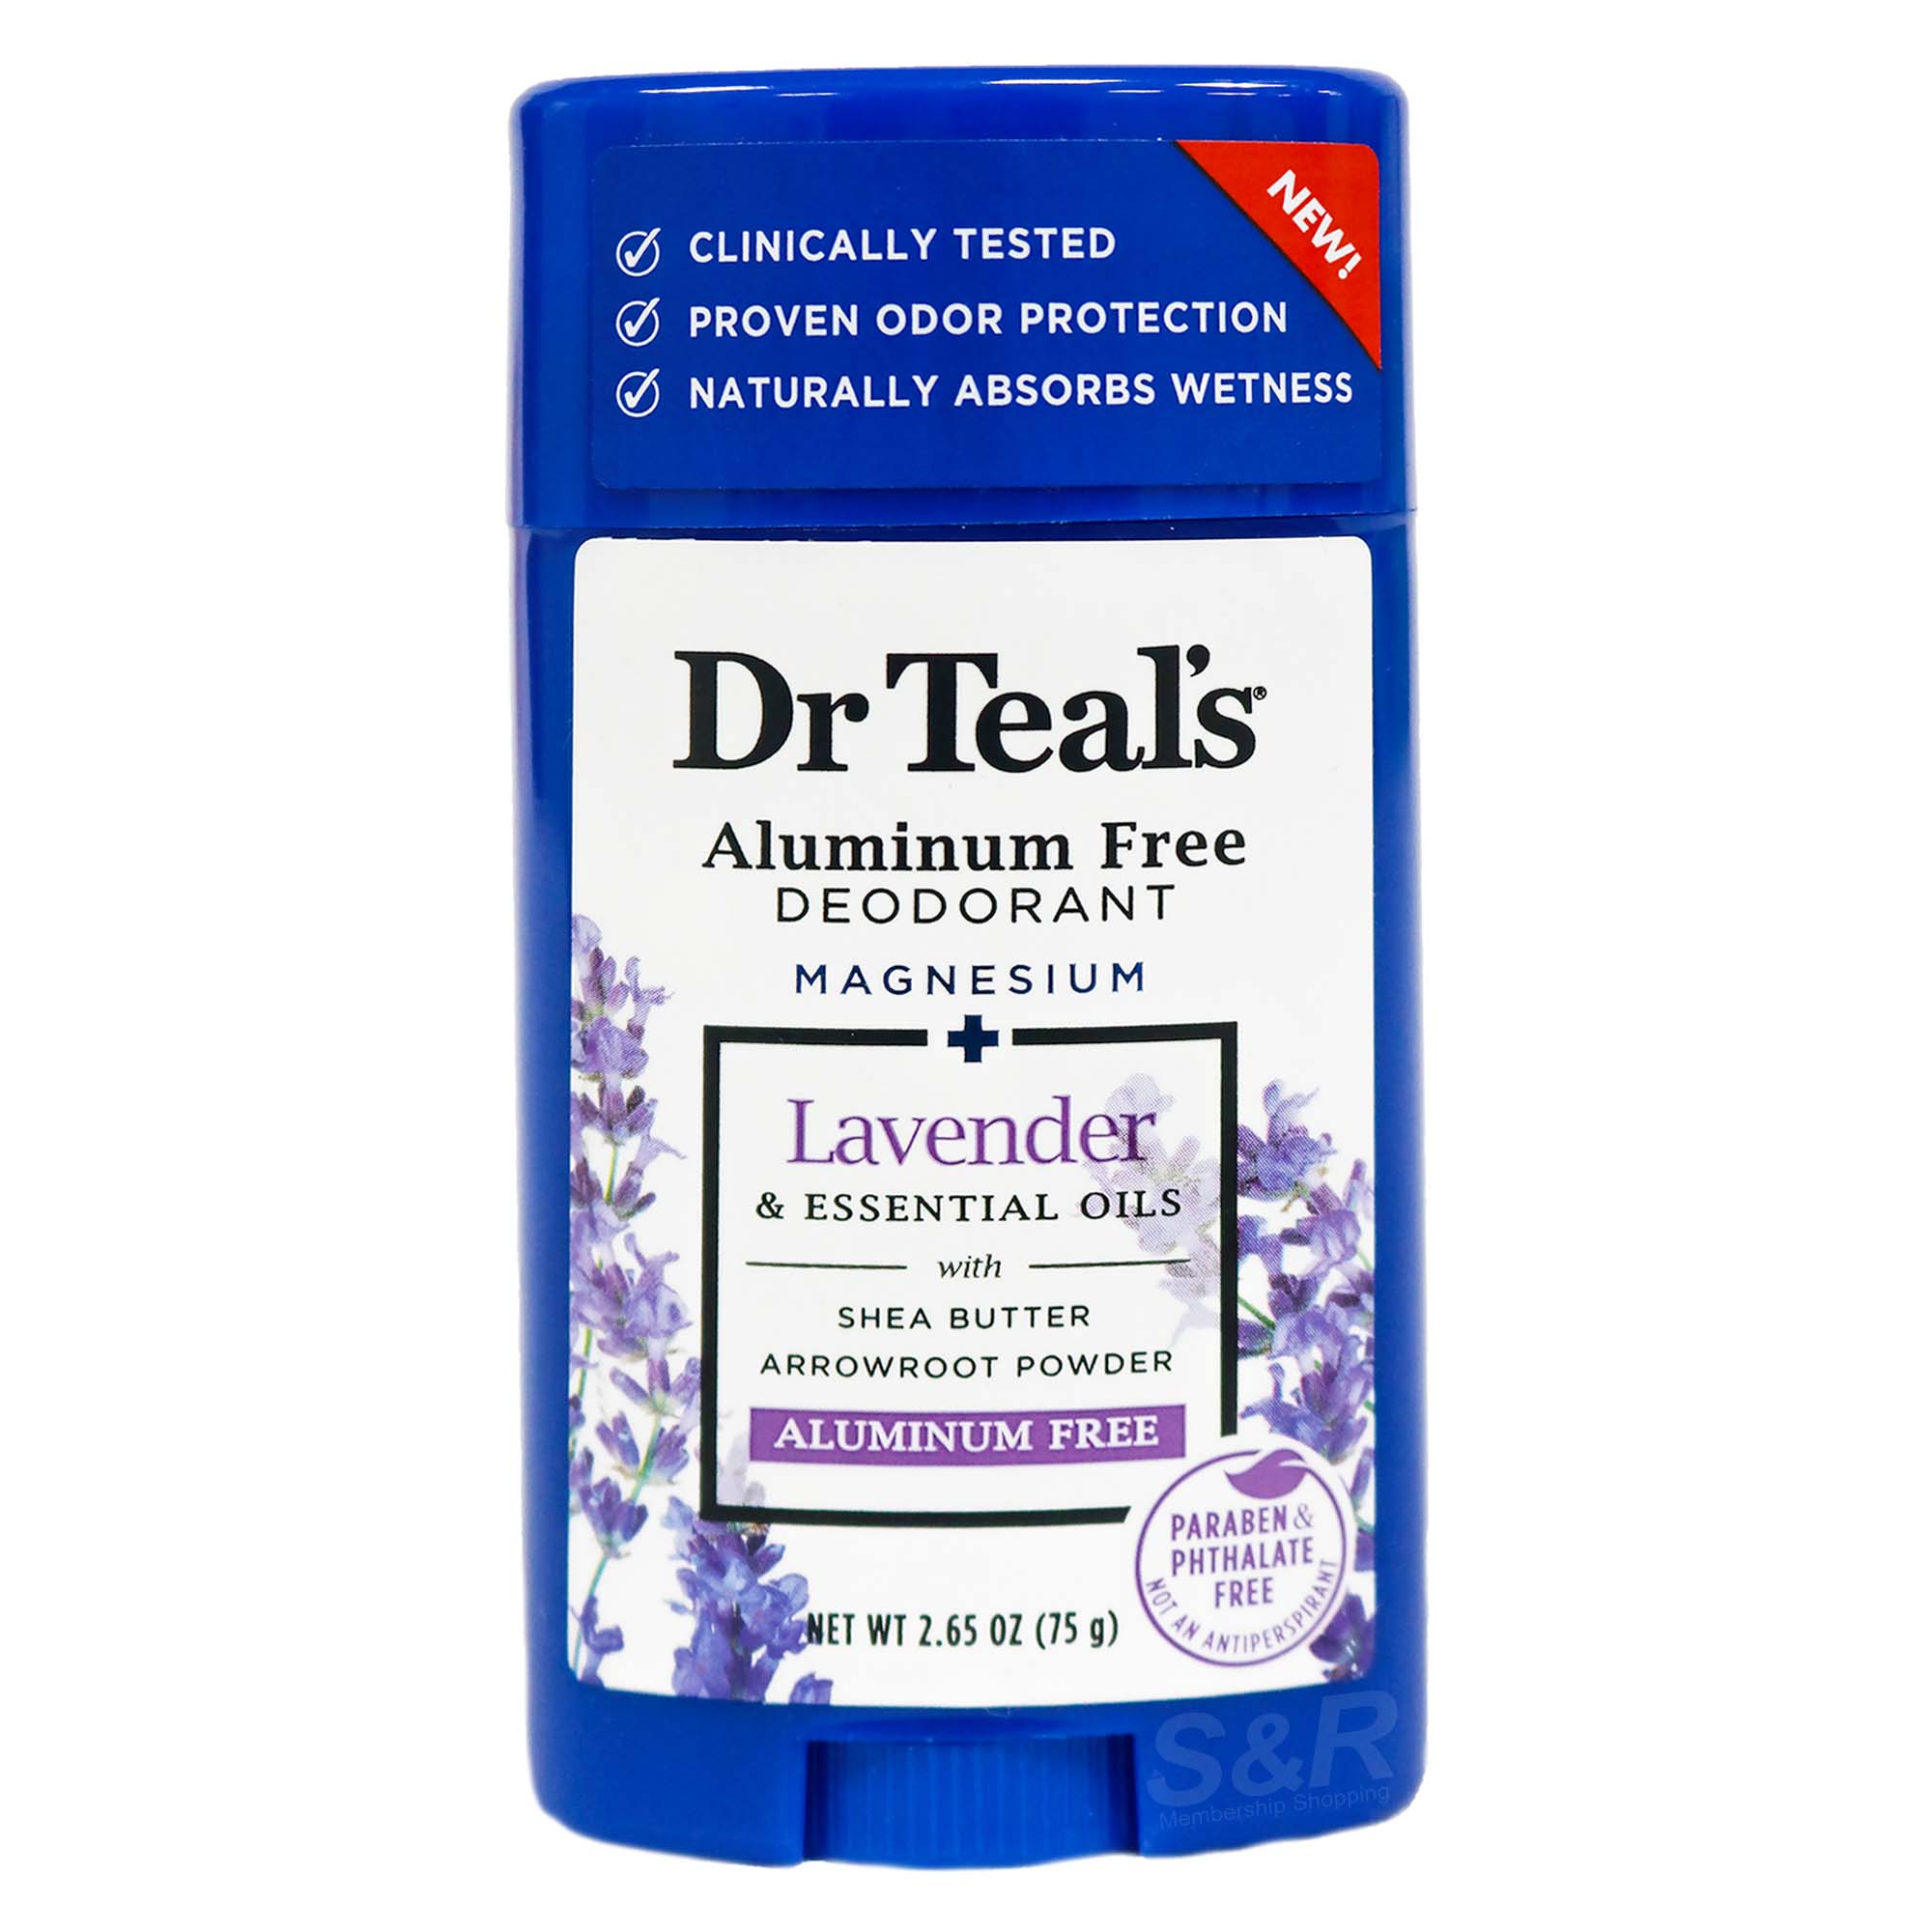 Dr. Teal’s Aluminum Free Deodorant with Lavender 75g